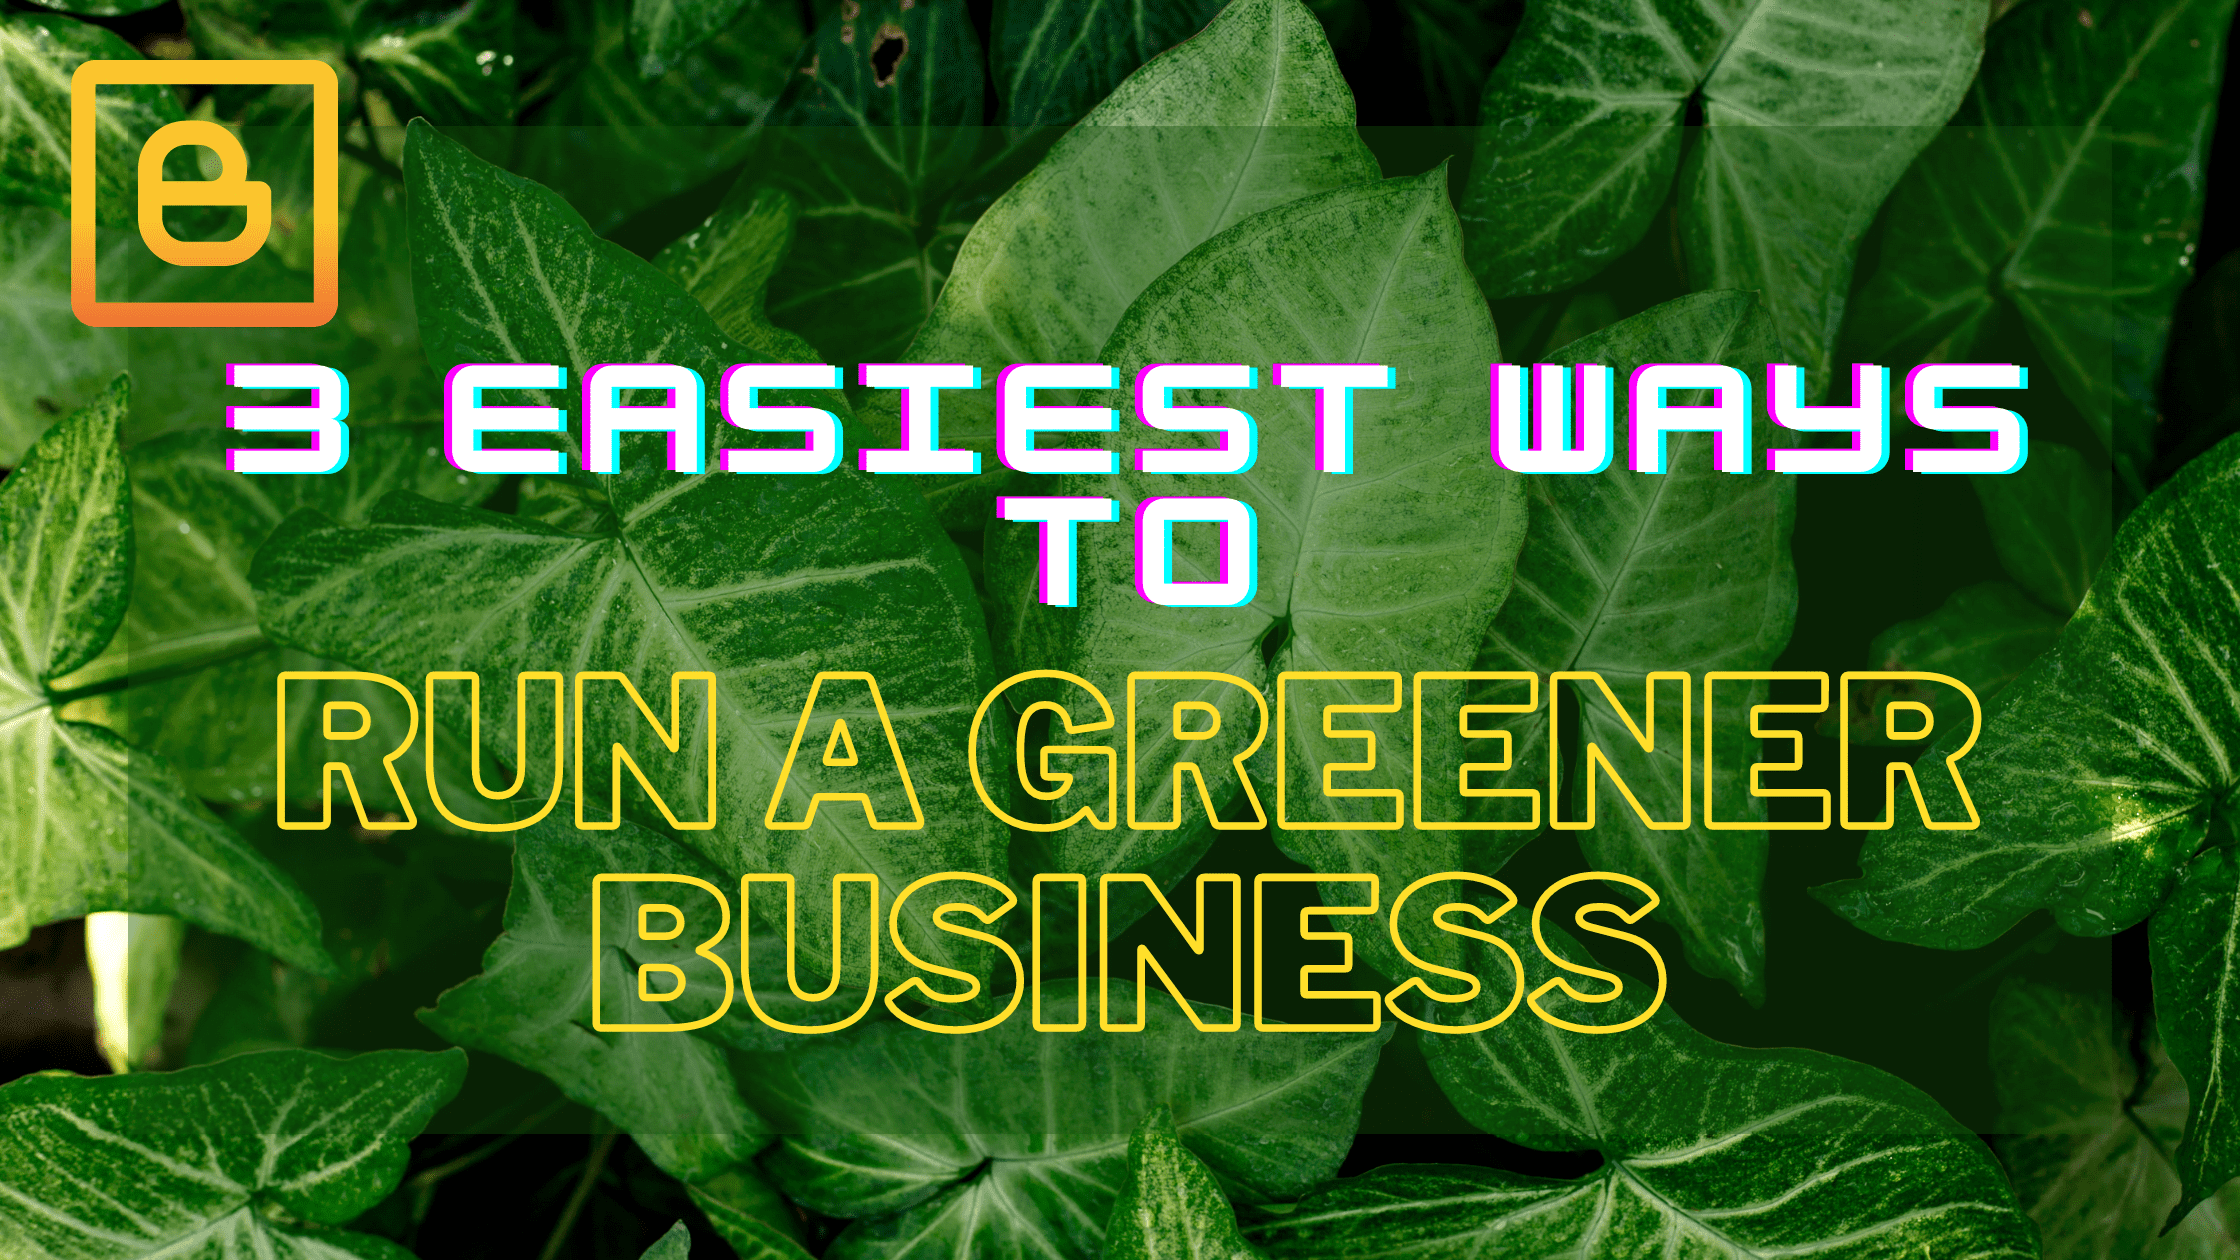 3 Easiest Ways to Run a Greener Business